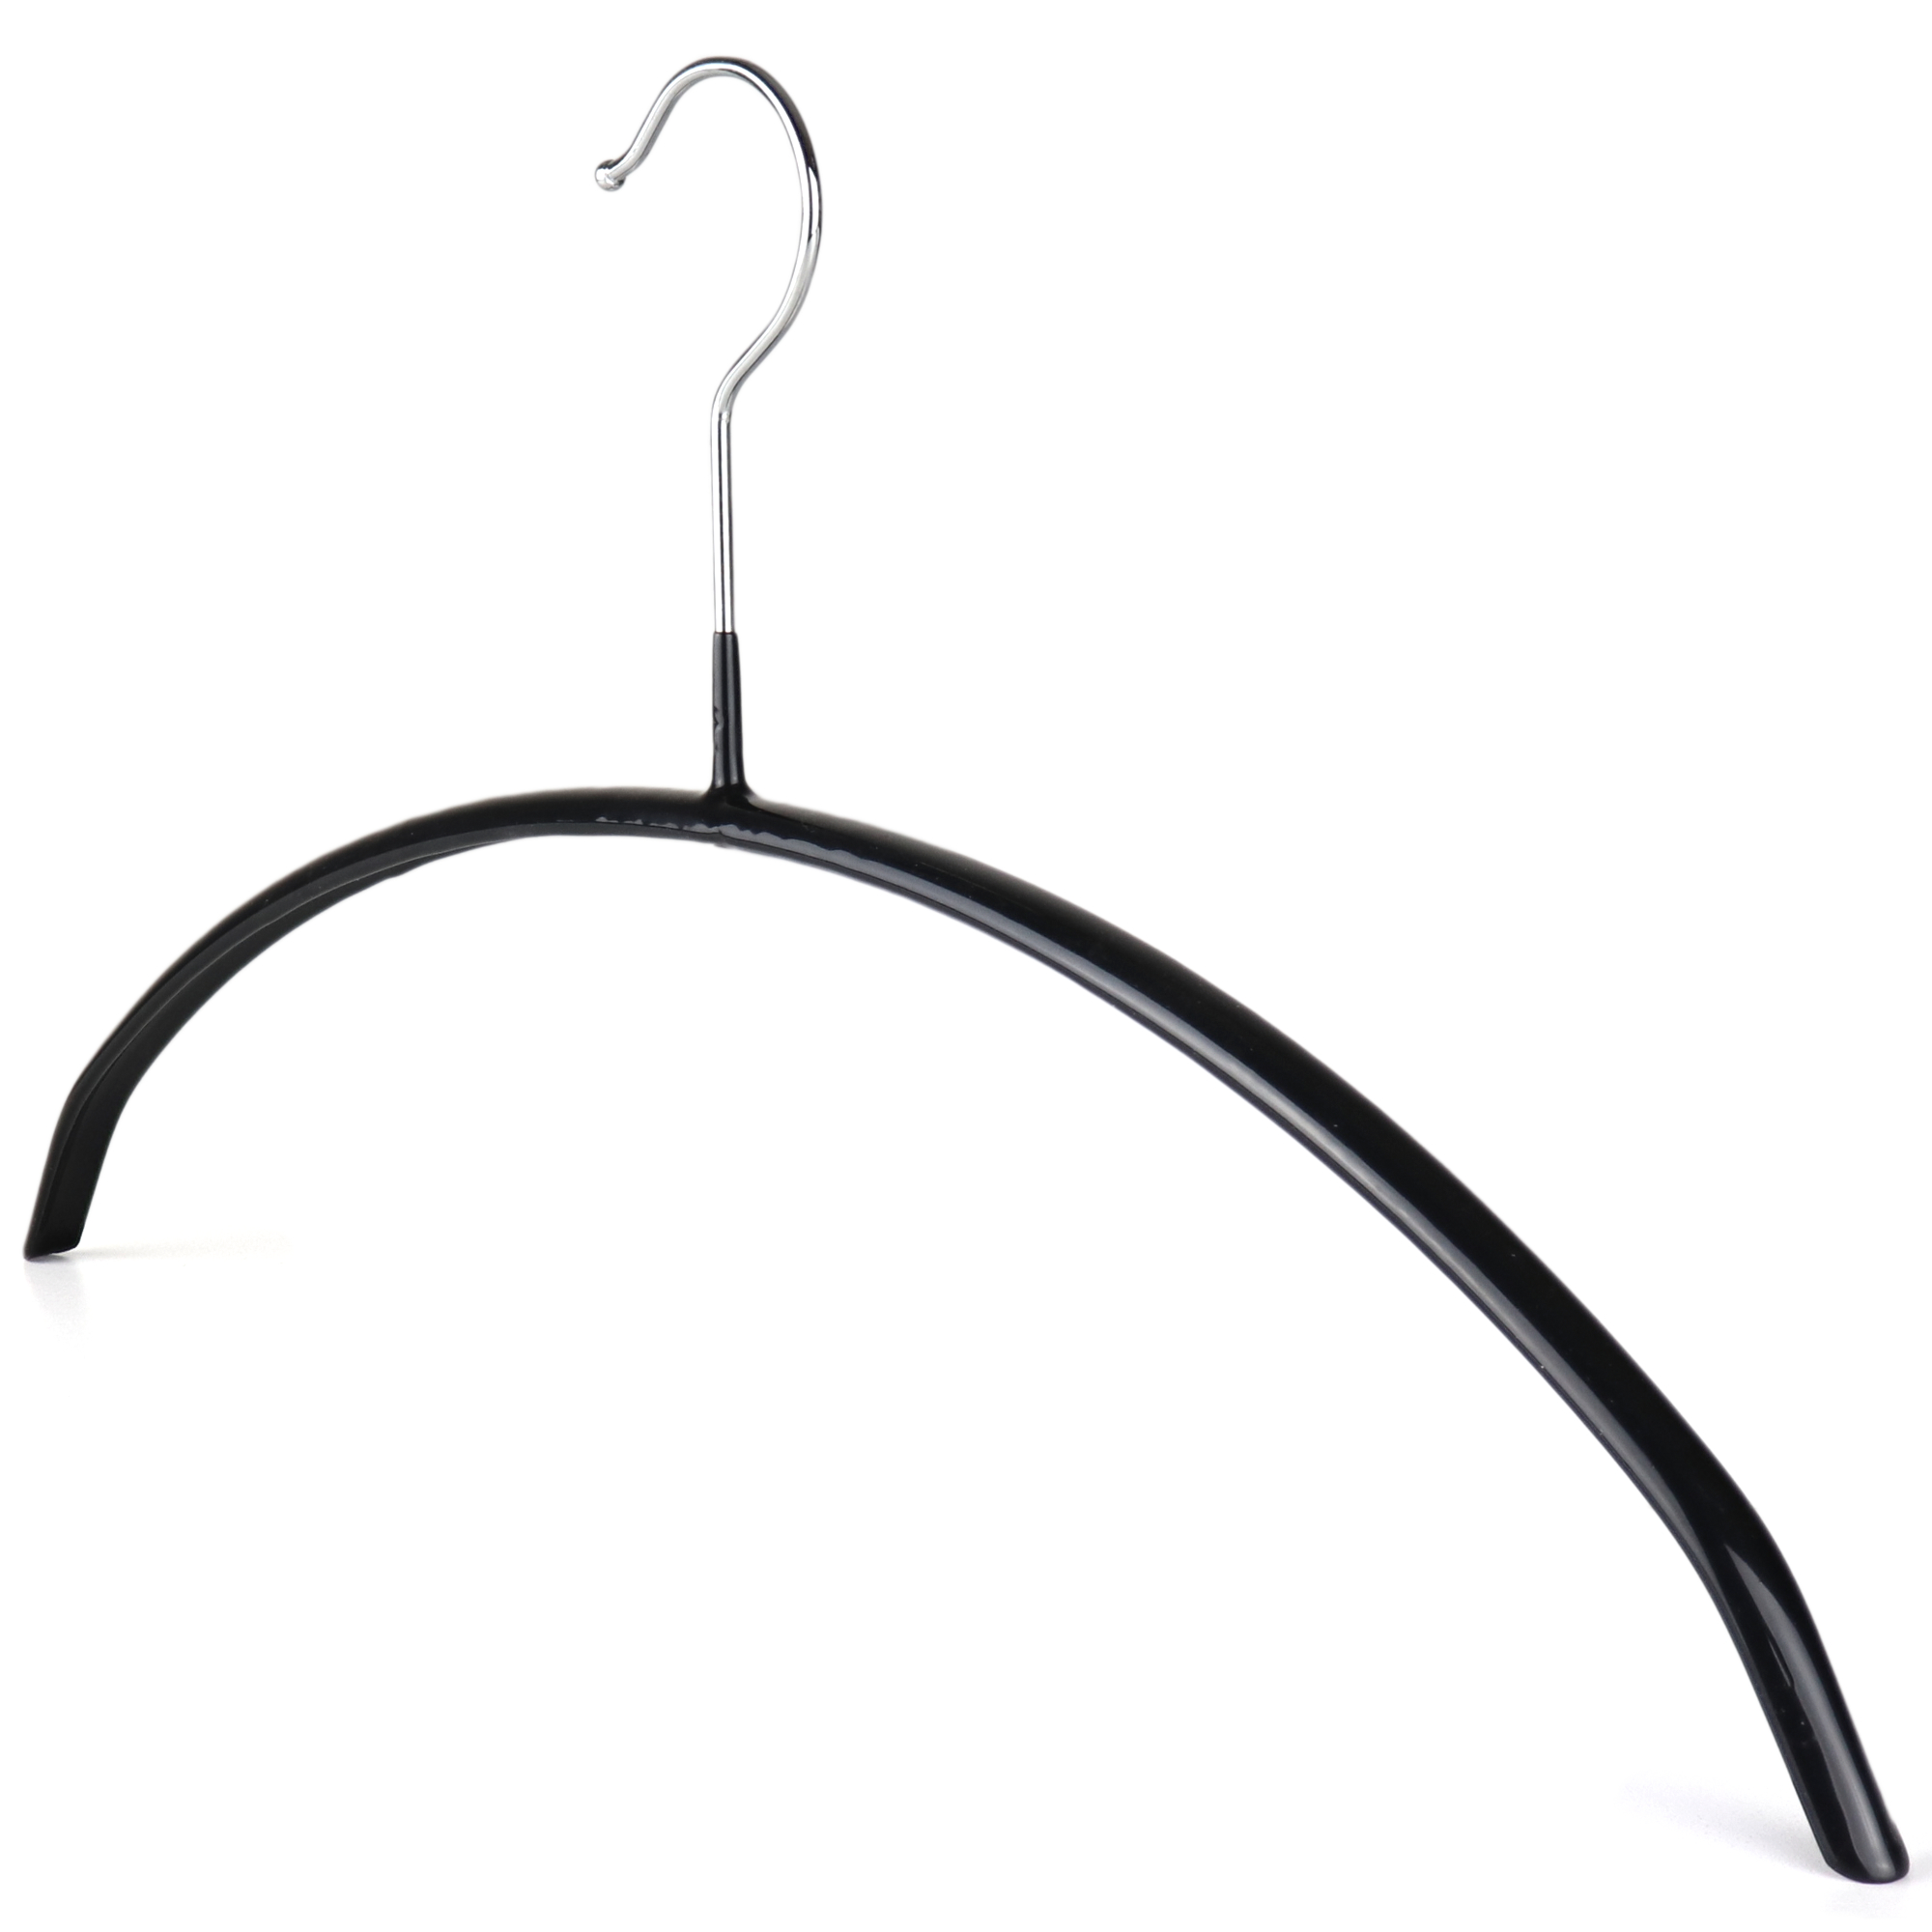 Trouser Coat Clothes Hangers Skirt 10 Knitwear Hanger with Non Slip Rubber and Bar 